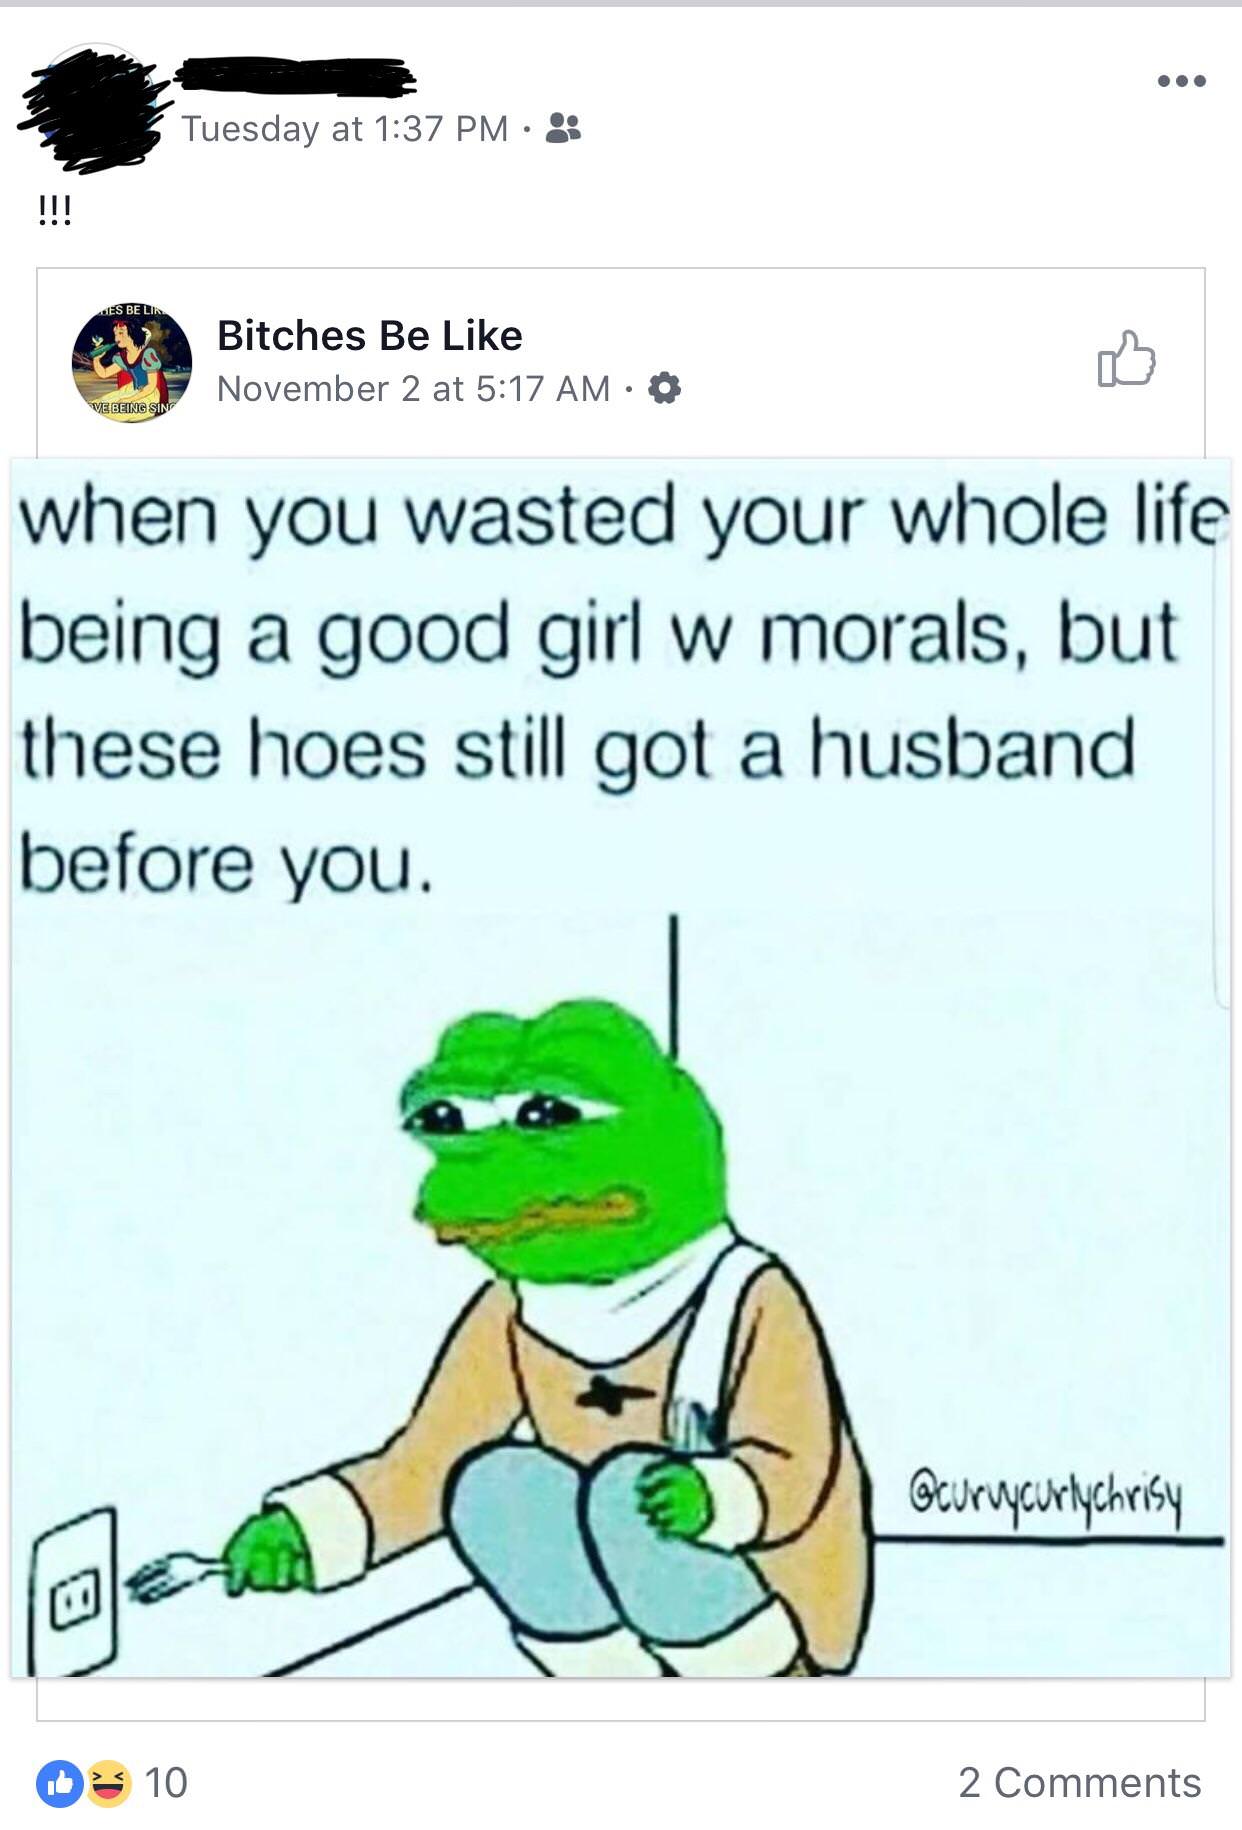 nice girls posts - Tuesday at Les Be Lin Bitches Be November 2 at Ve Being Sing Bovember in this formam. co m when you wasted your whole life being a good girl w morals, but these hoes still got a husband before you Ocurrycurlychrisy Os 10 2